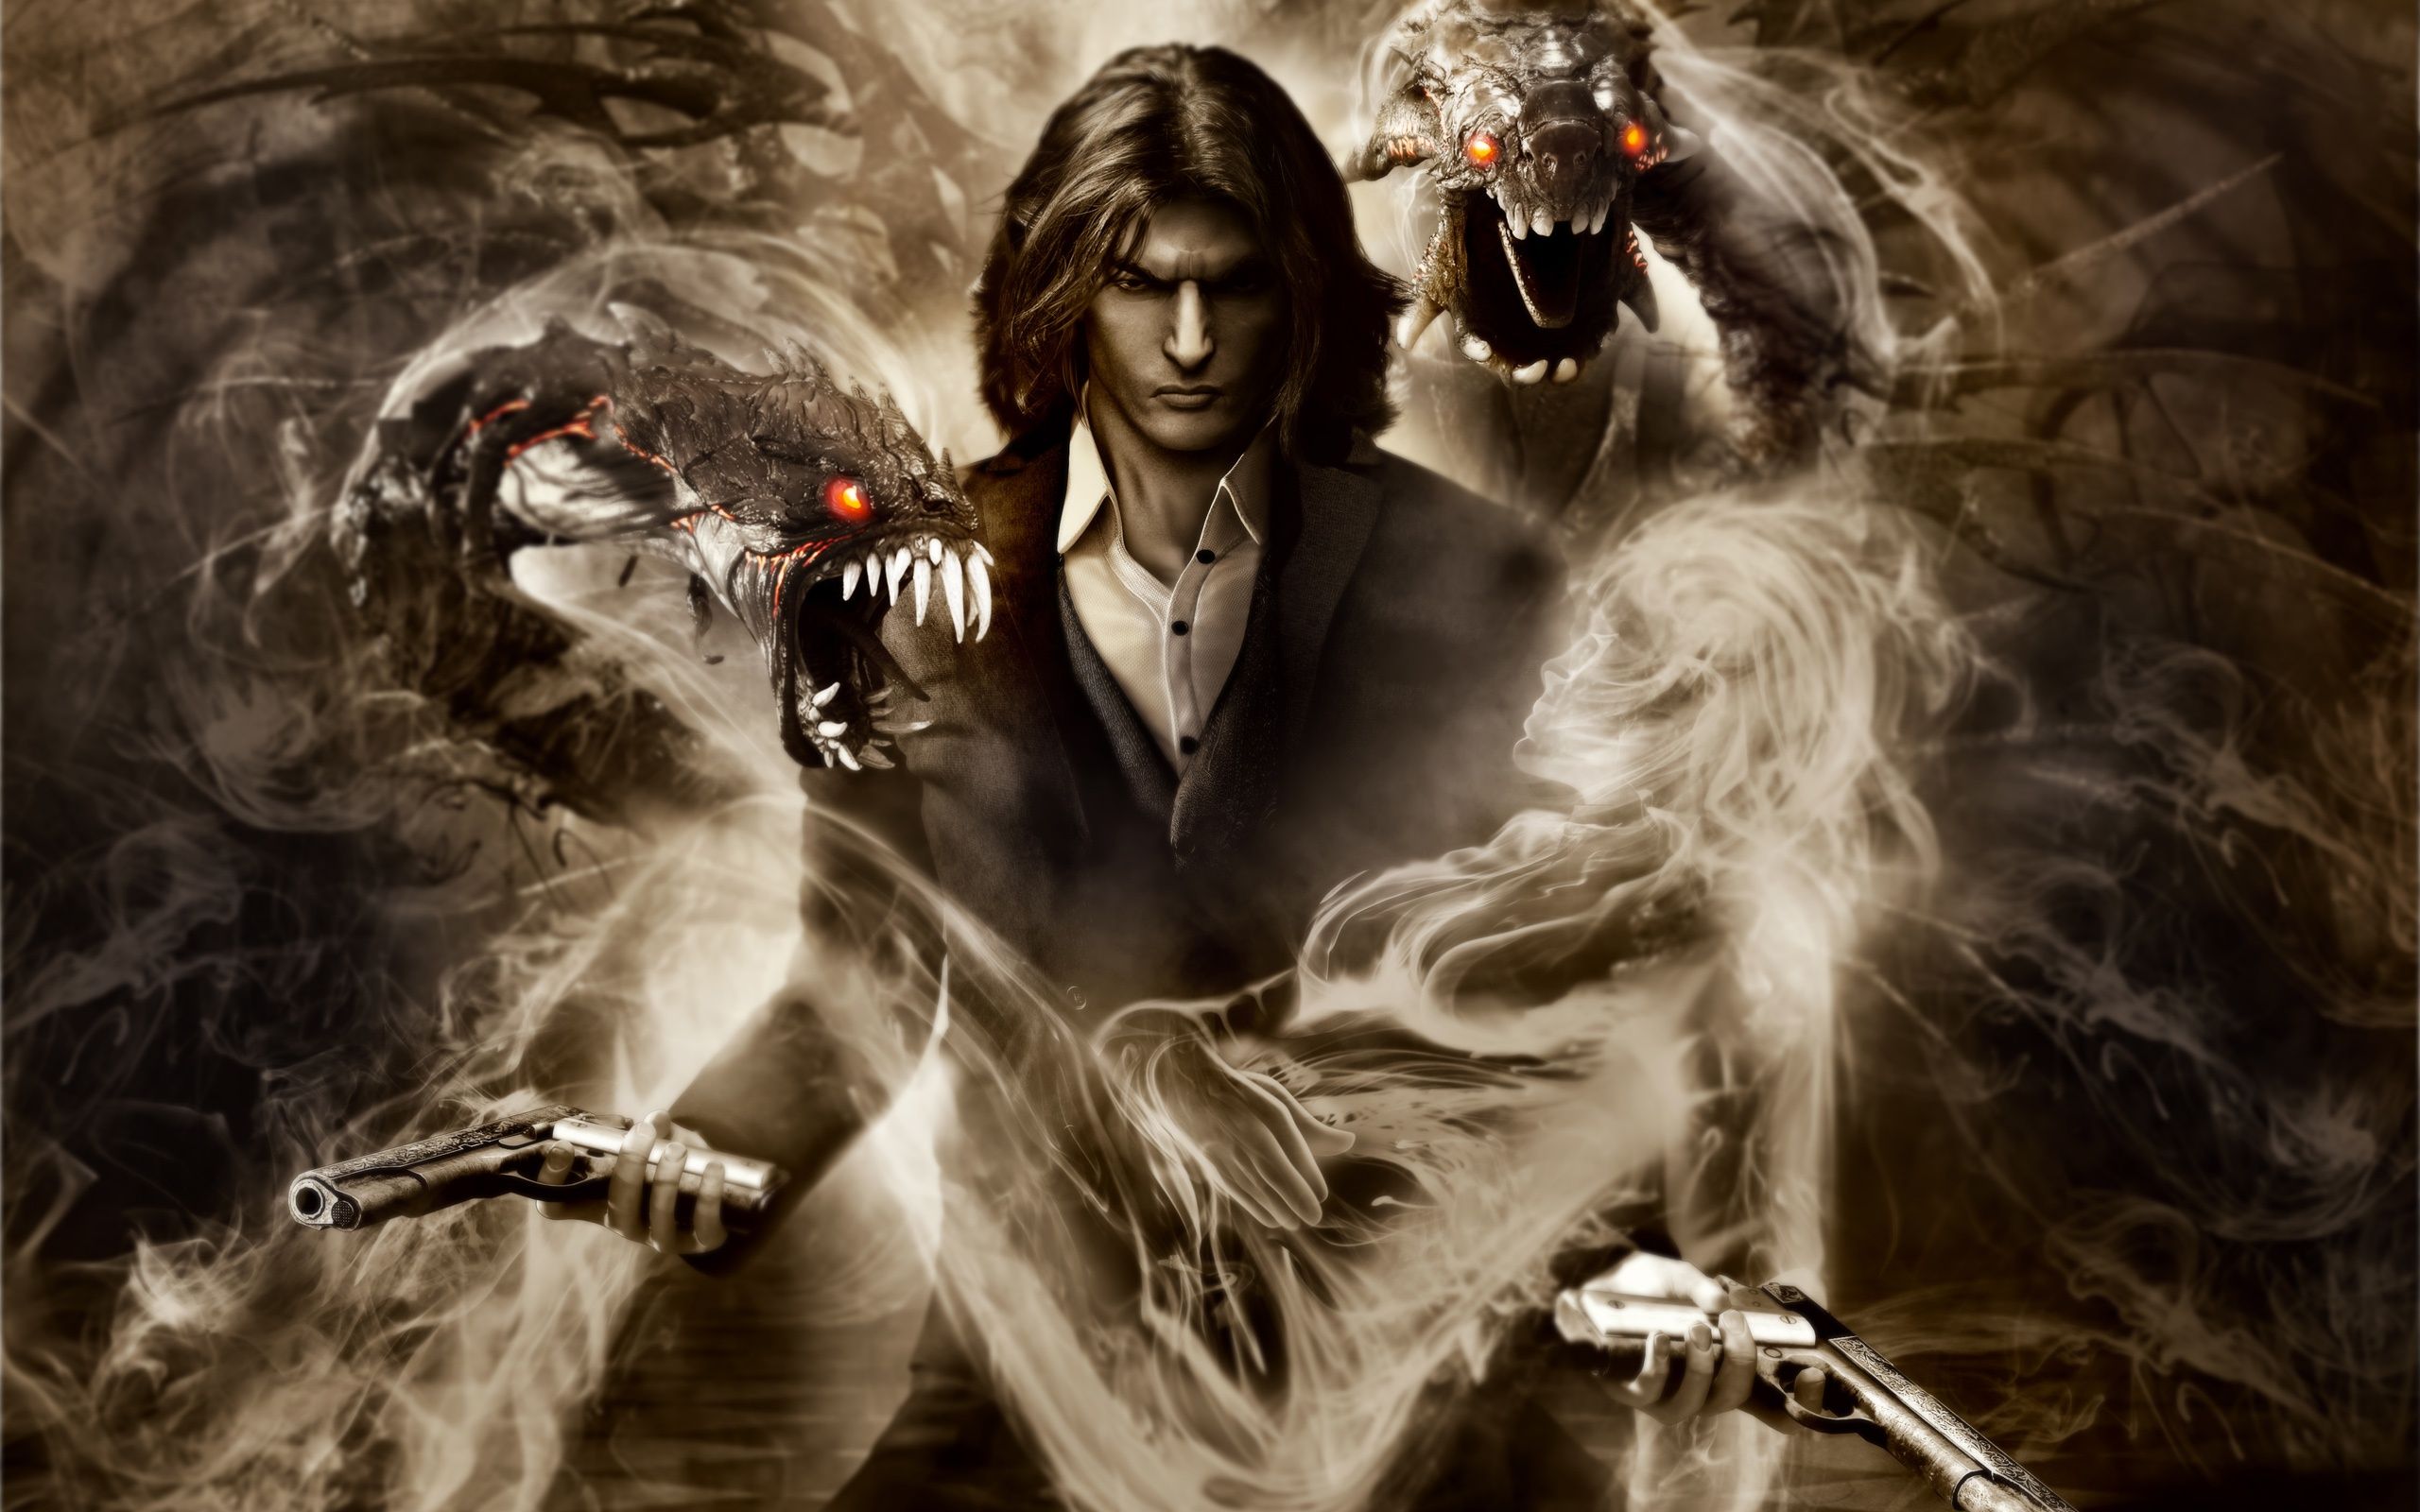 the darkness game. The Darkness II Game x 1600. Download. Close. The darkness ii, The darkness game, Image comics